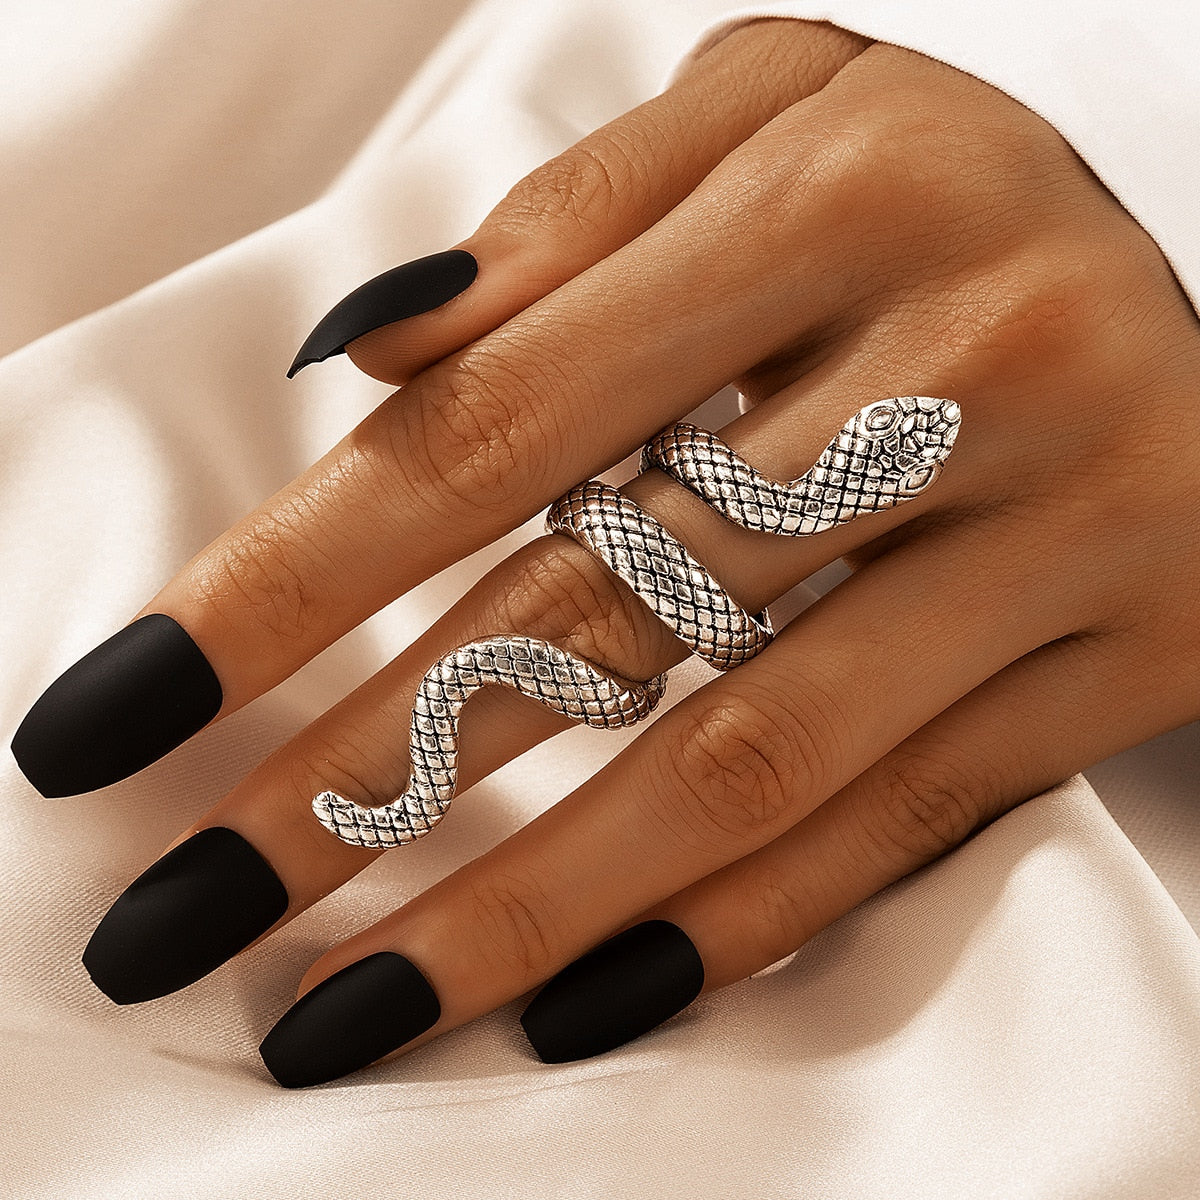 4pcs/set Vintage Snake Shape Rings for Women Men Gothic Silver Color Animal Exaggerated Metal Alloy Finger Ring Sets Jewelry - Niki Ice Jewelry 